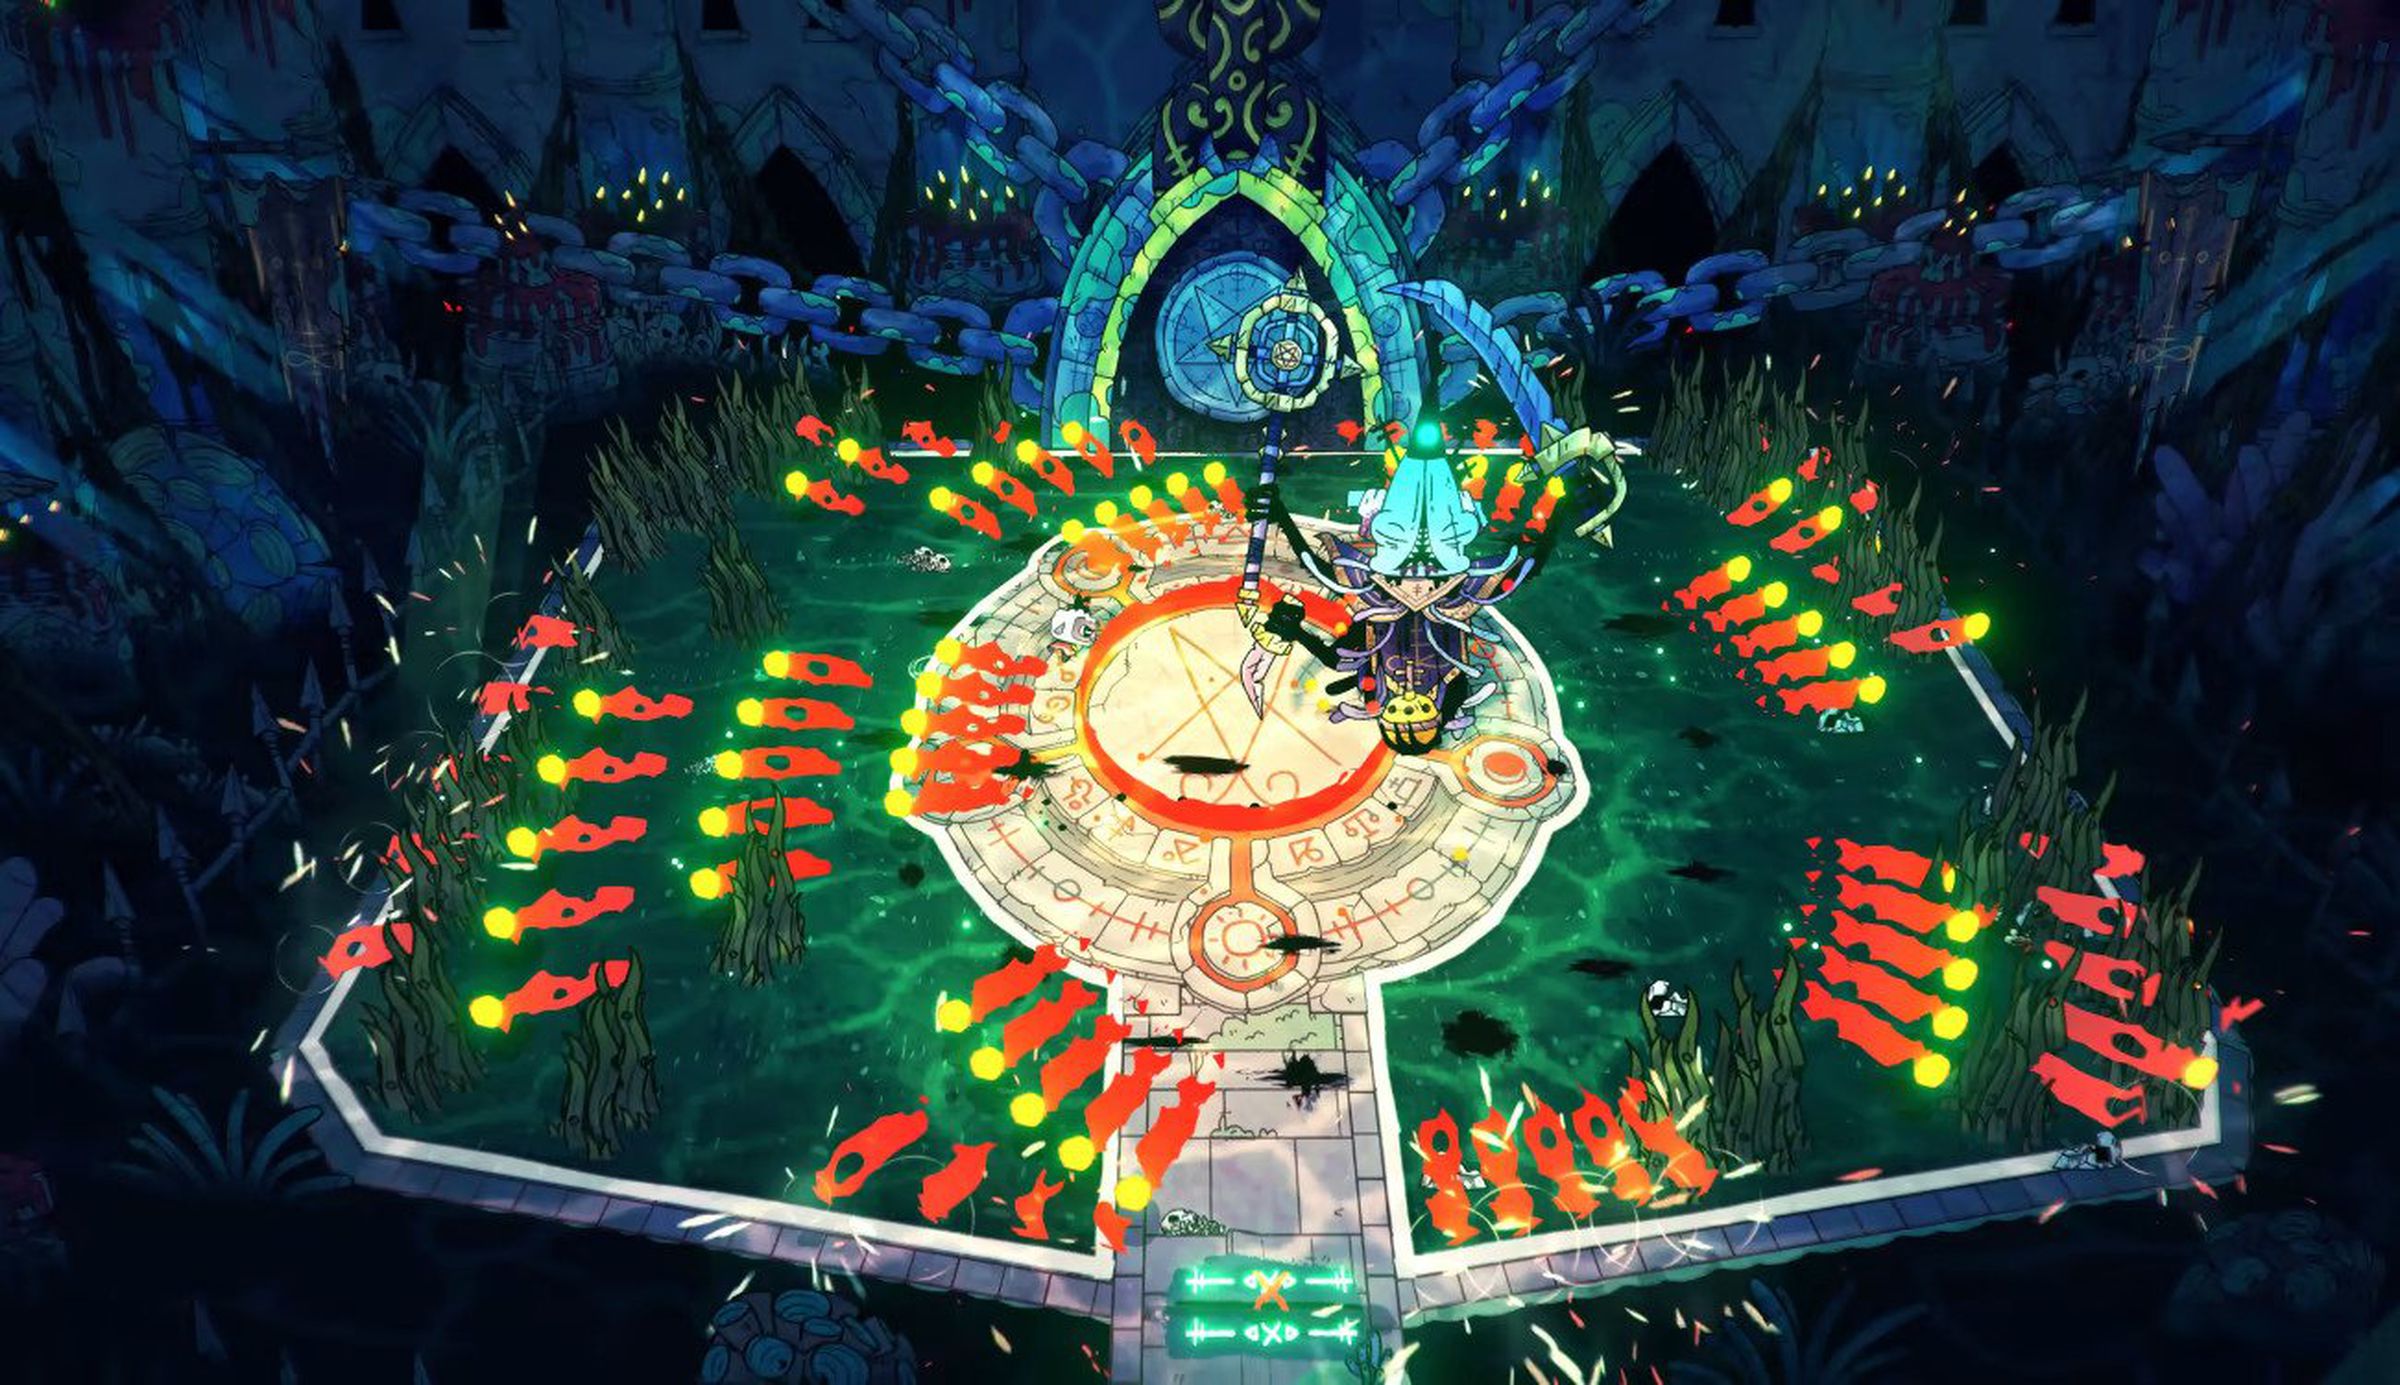 Screenshot from Cult Of The Lamb featuring the Lamb dodging a boss’ yellow orbs attack arranged in frustrating patterns that make them difficult to doge